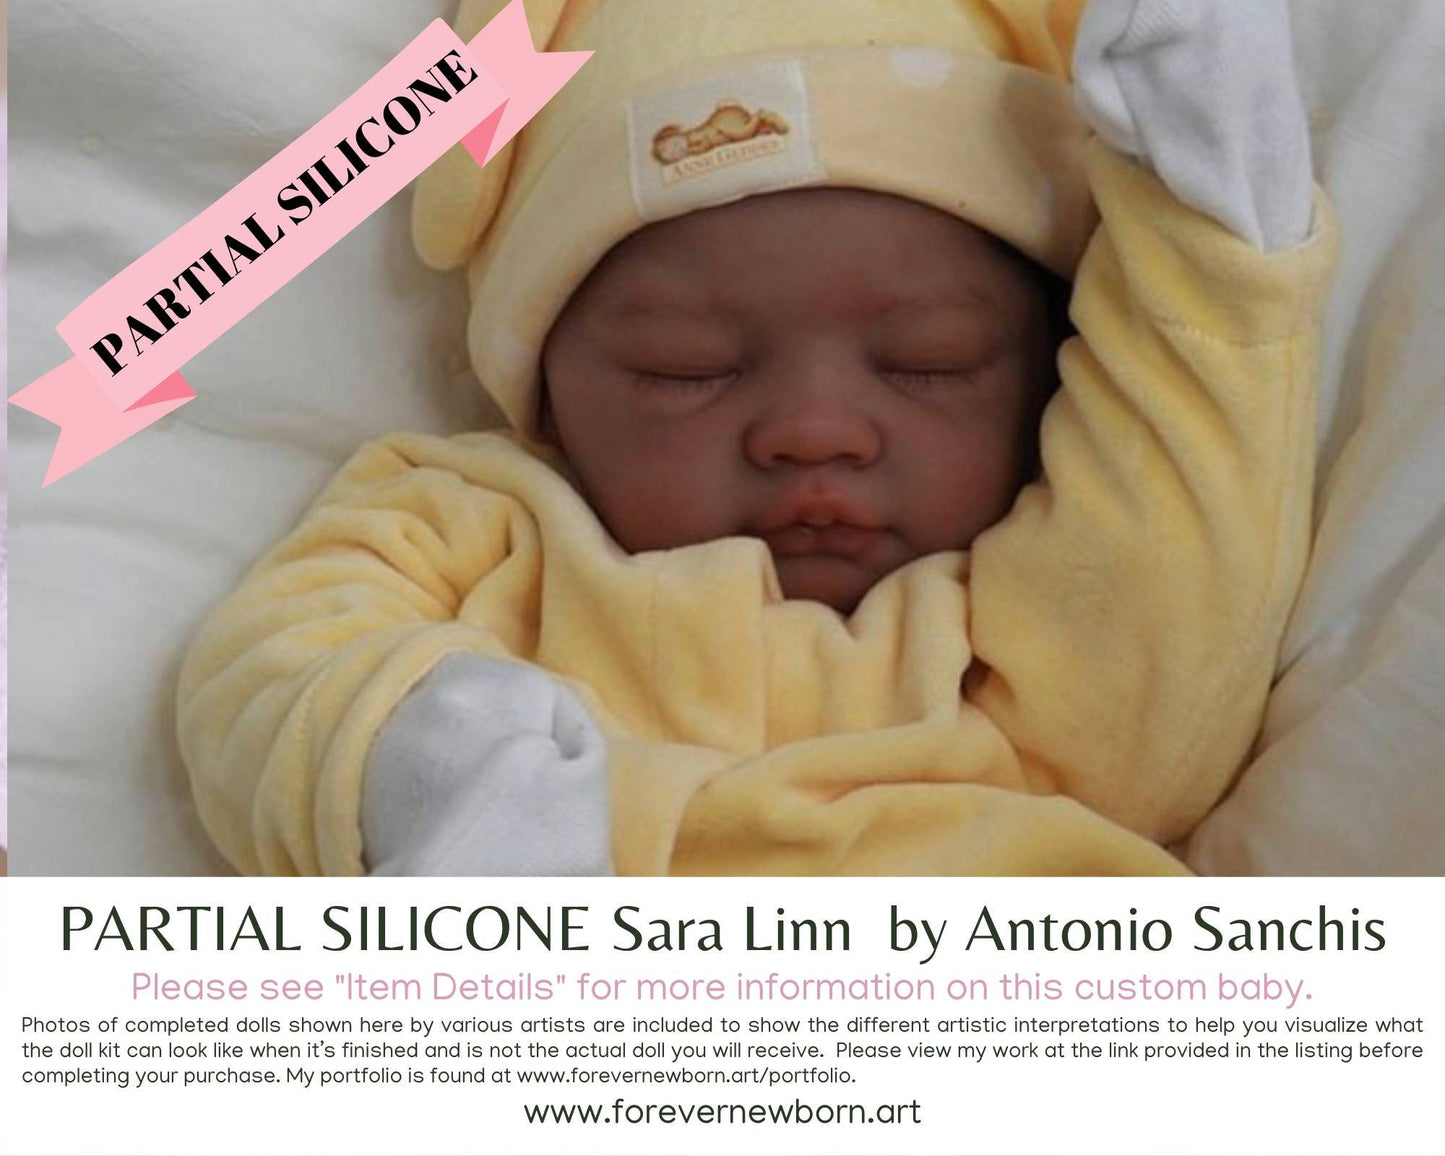 SiLiCoNe BaBy Sara Linn by Antonio Sanchis (21"+ Full Limbs) with cloth body. Extended Processing Time May Be Required. ASK FIRST!